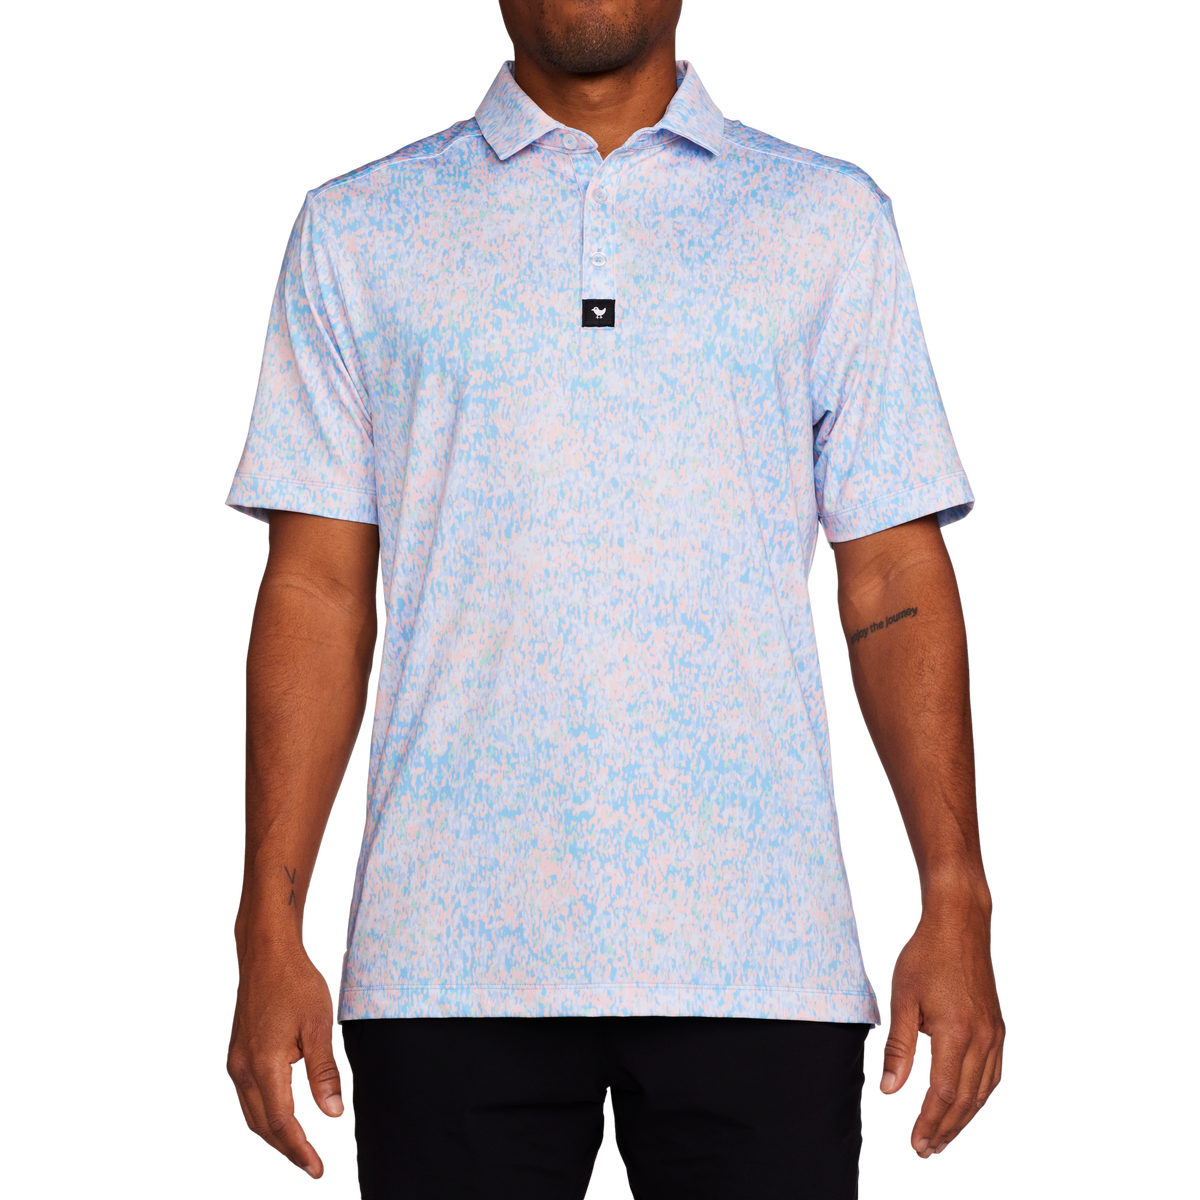 Bad Birdie Champagne Showers Short Sleeve Polo Shirt | PGA TOUR Superstore